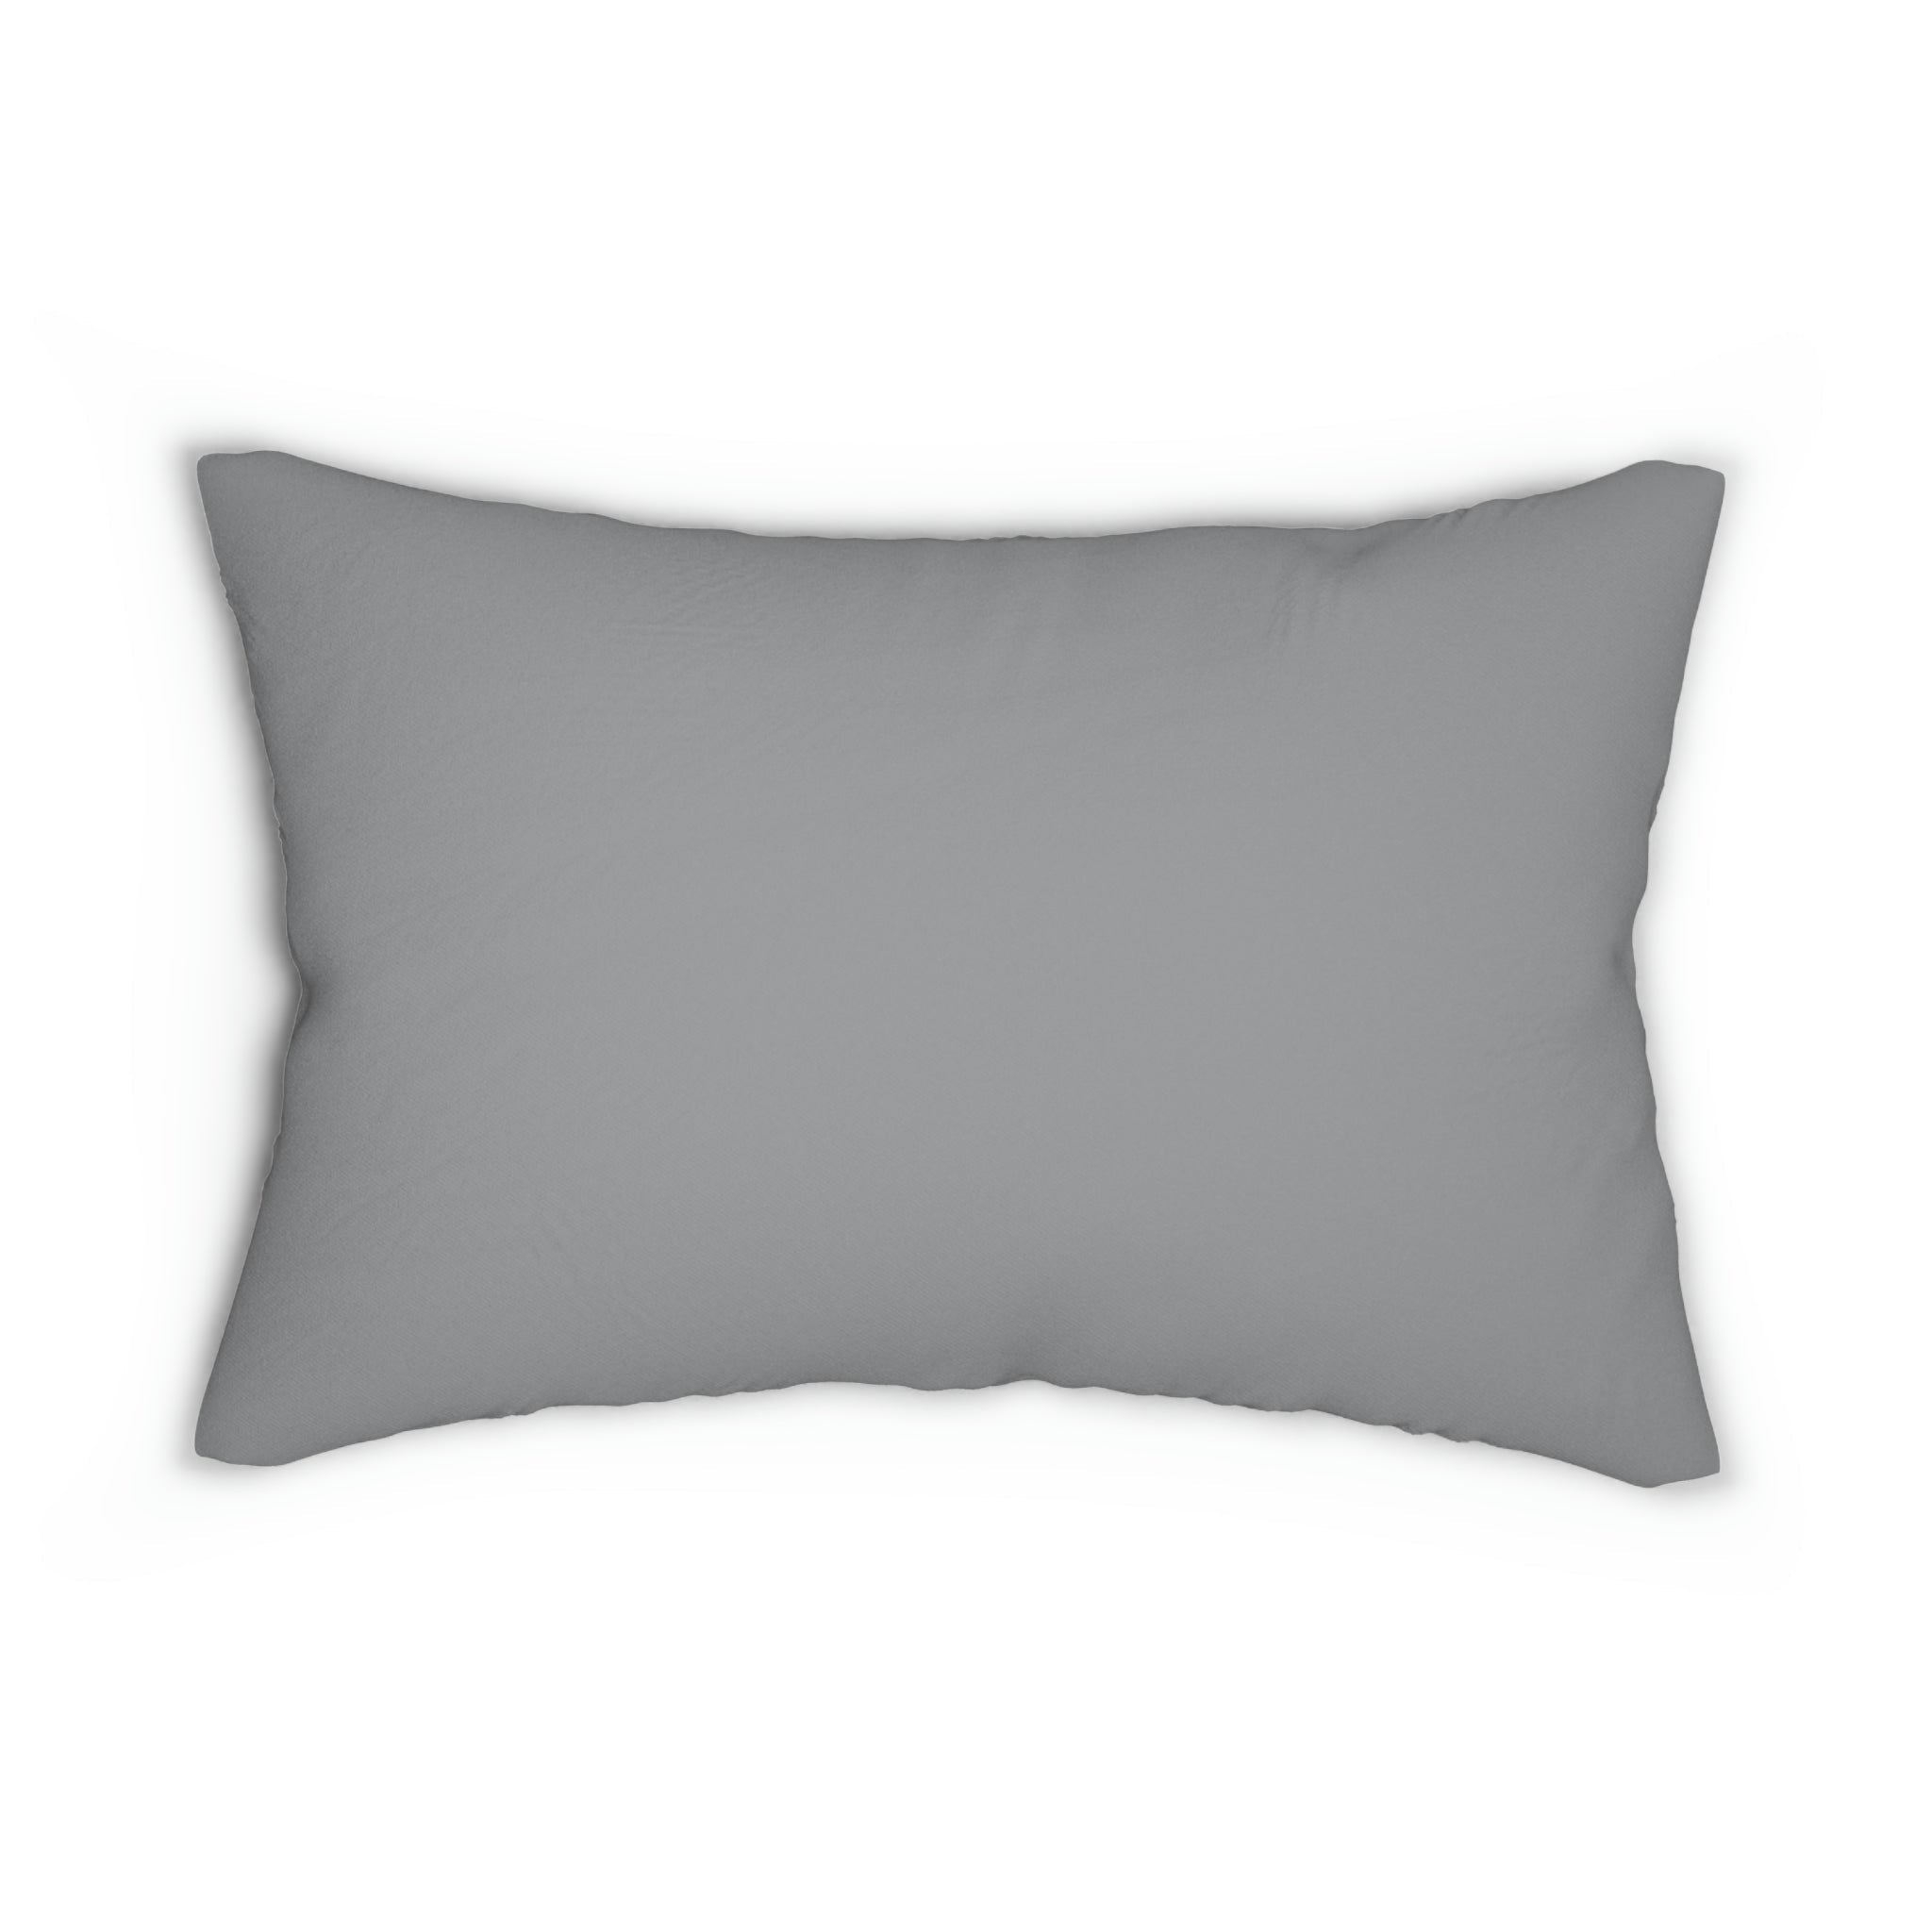 PILLOW | MTB | GREY | REMOVABLE COVER - Single Track Dreamer